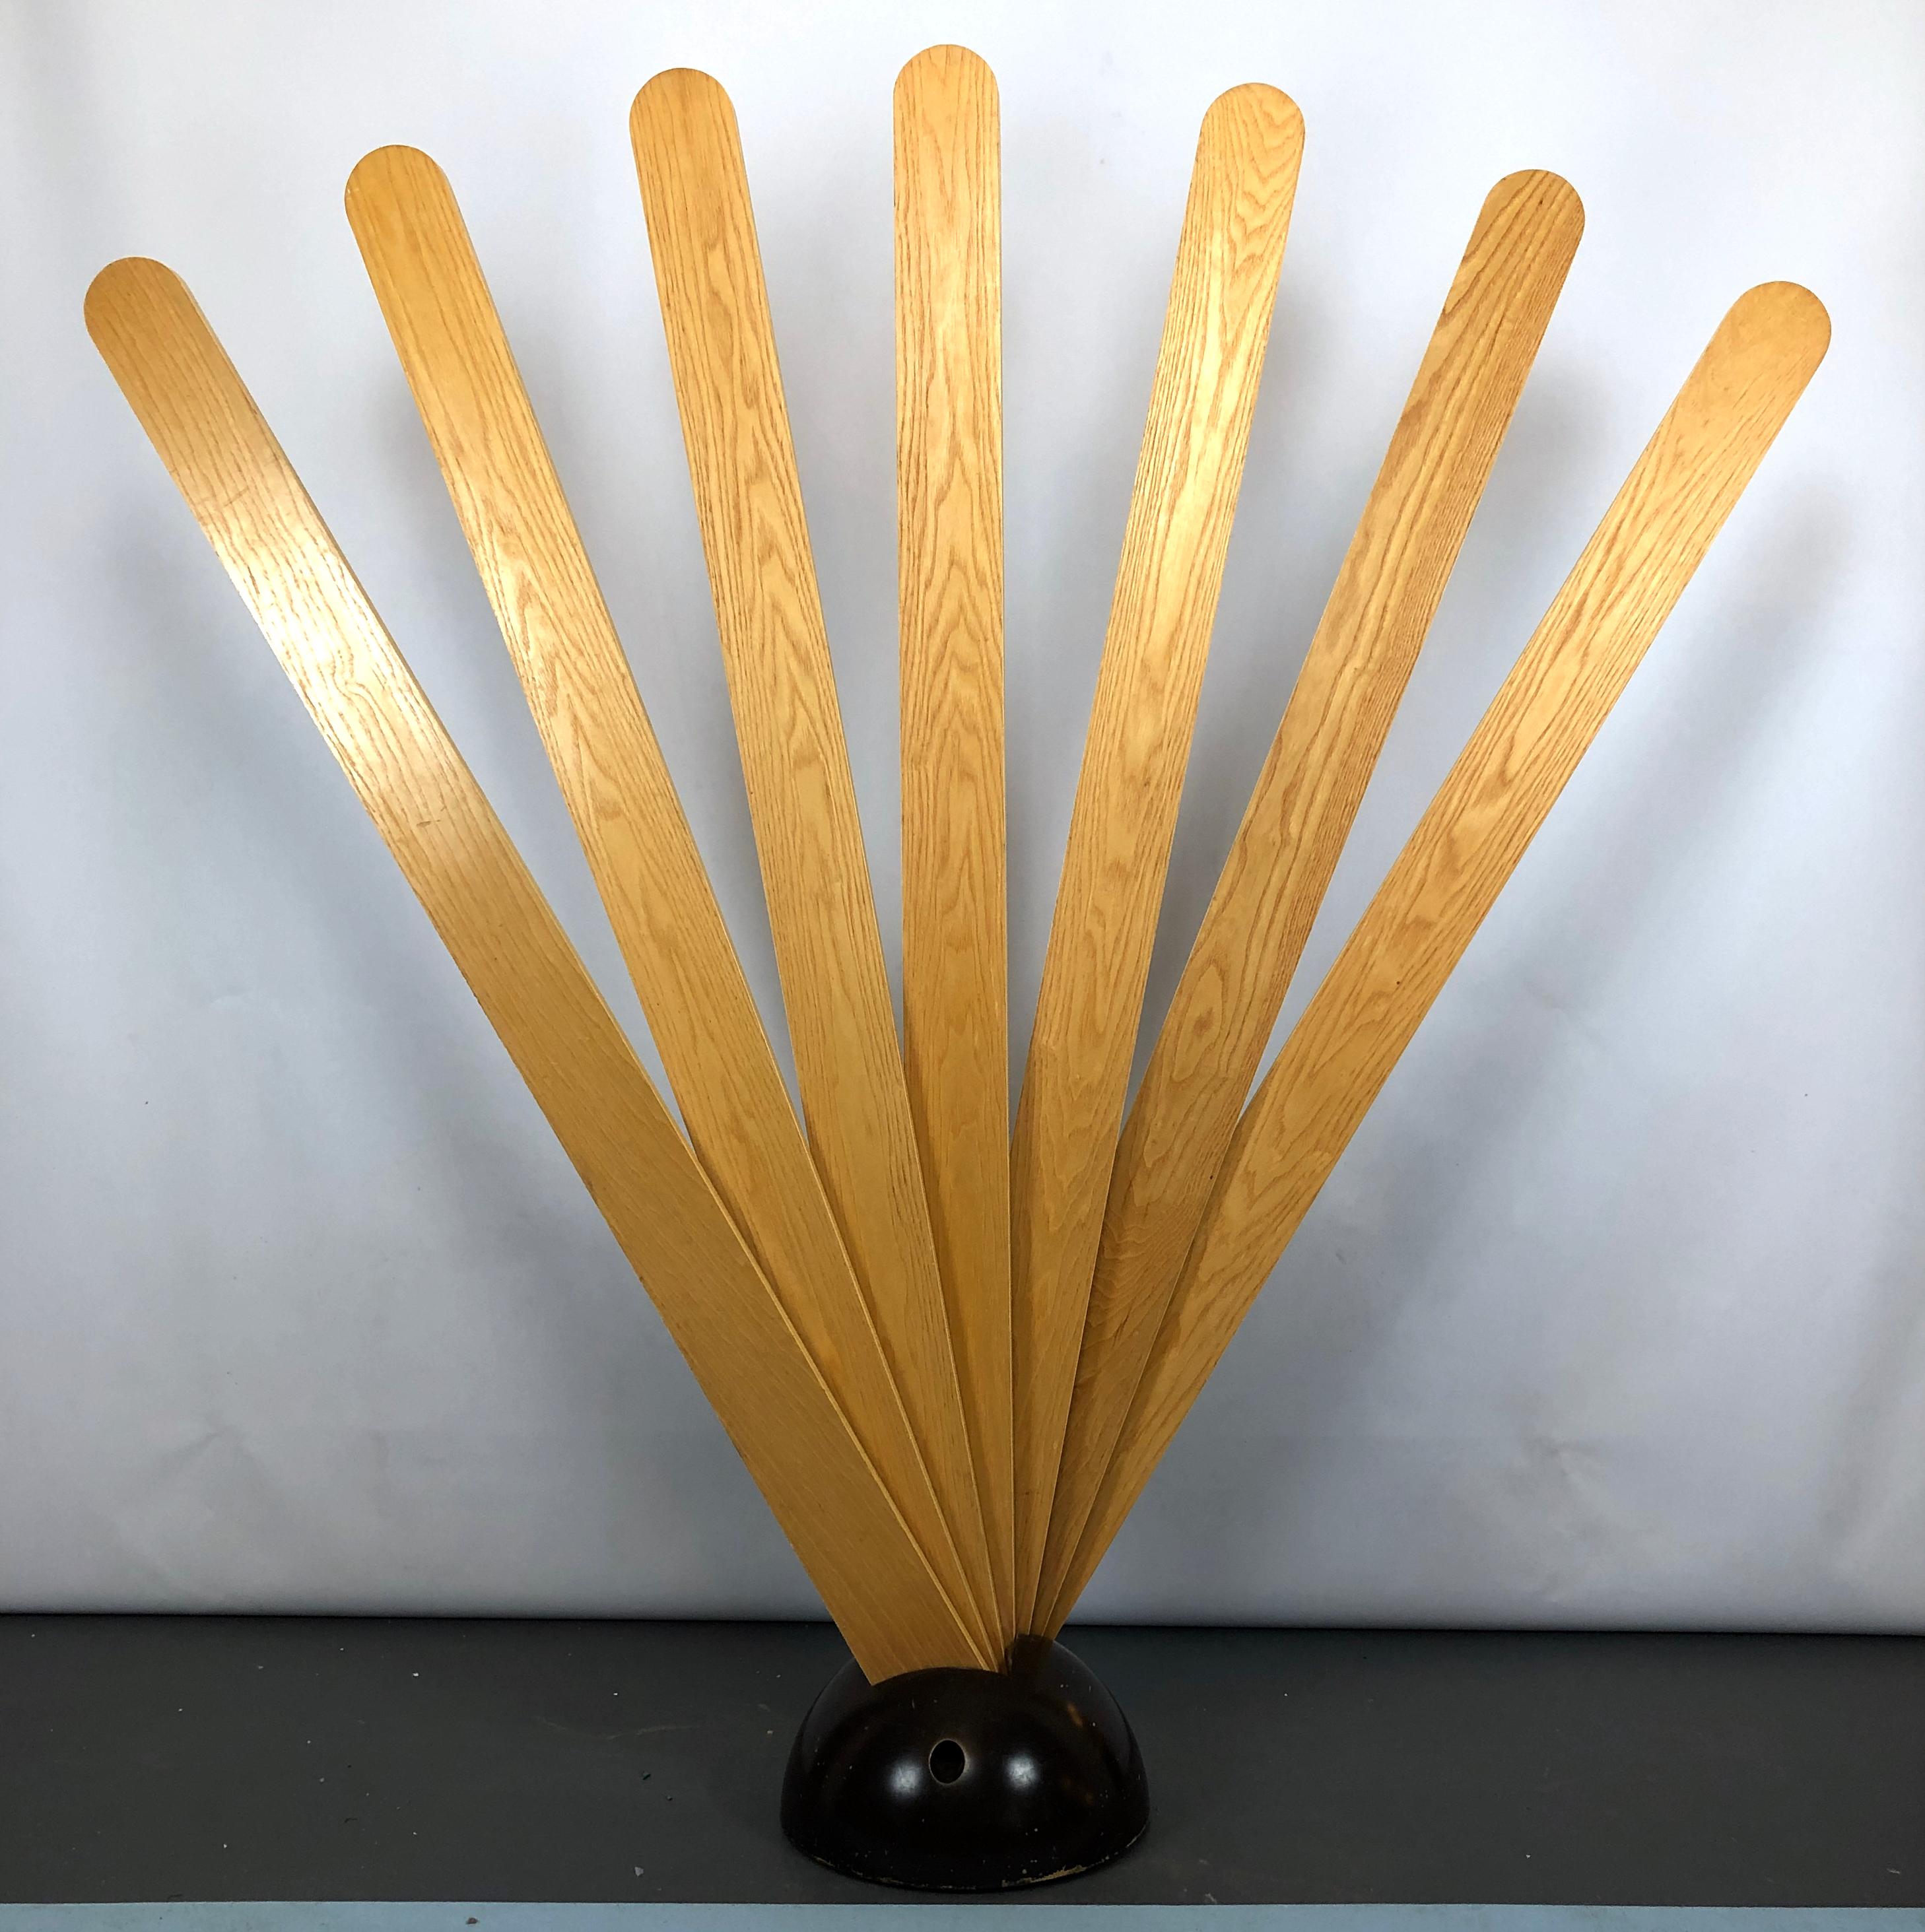 Good vintage condition for this first edition of wood coat rack or room divider designed by Giovanni Pasotto and produced in Italy during the 70s by Tarzia